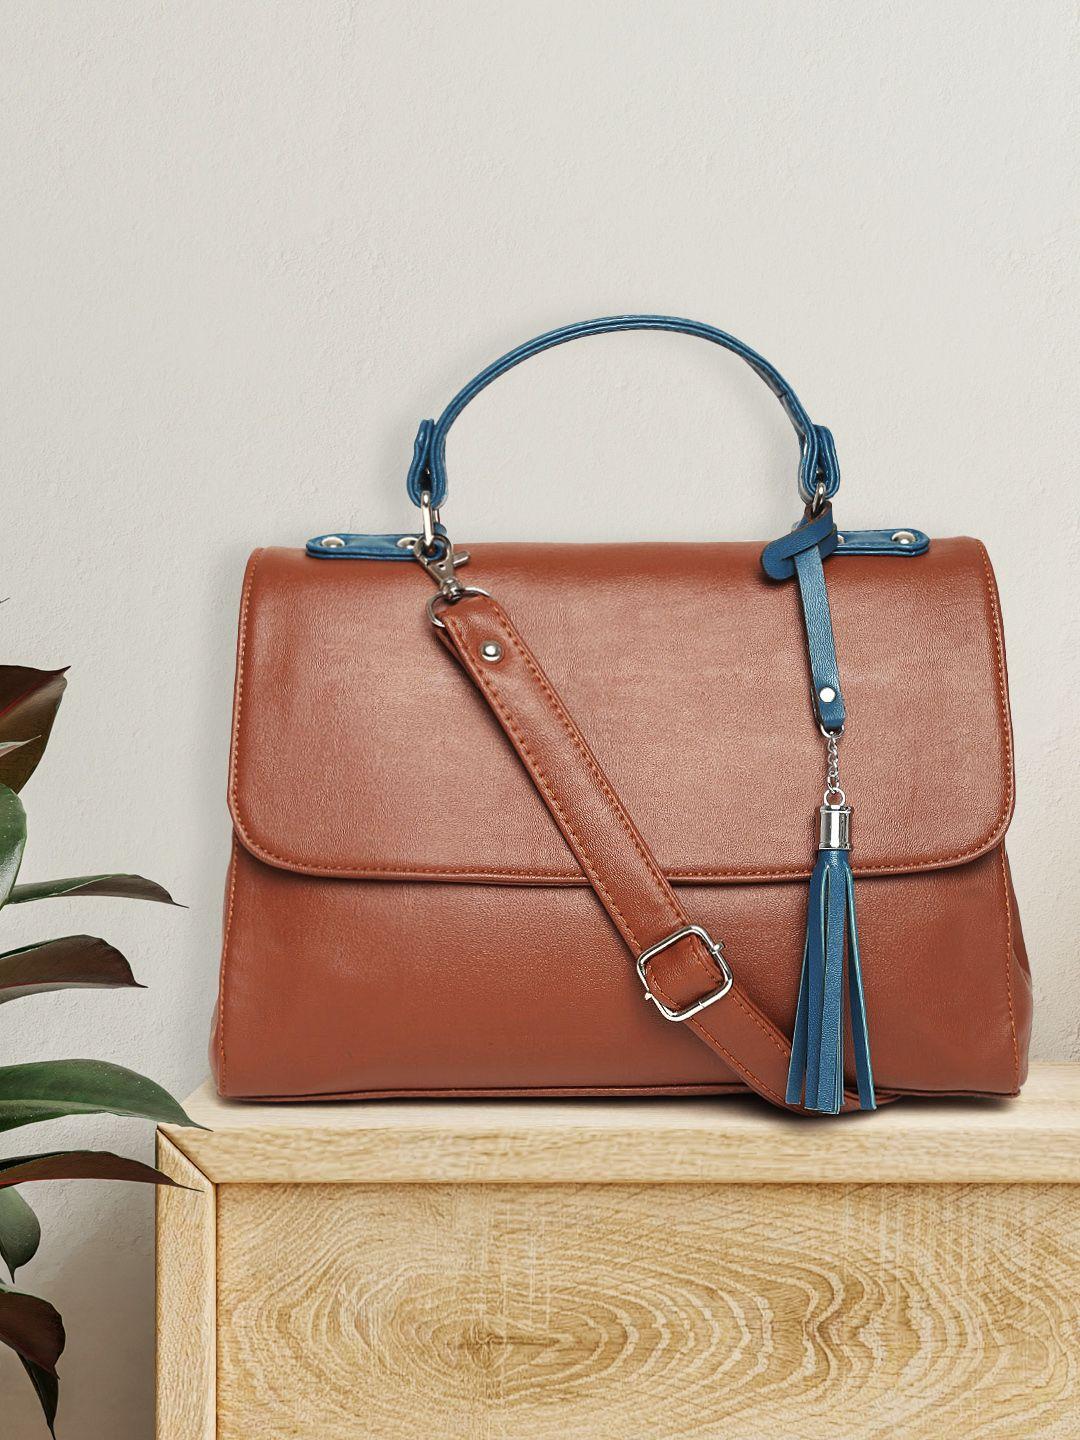 mast & harbour brown satchel with sling strap